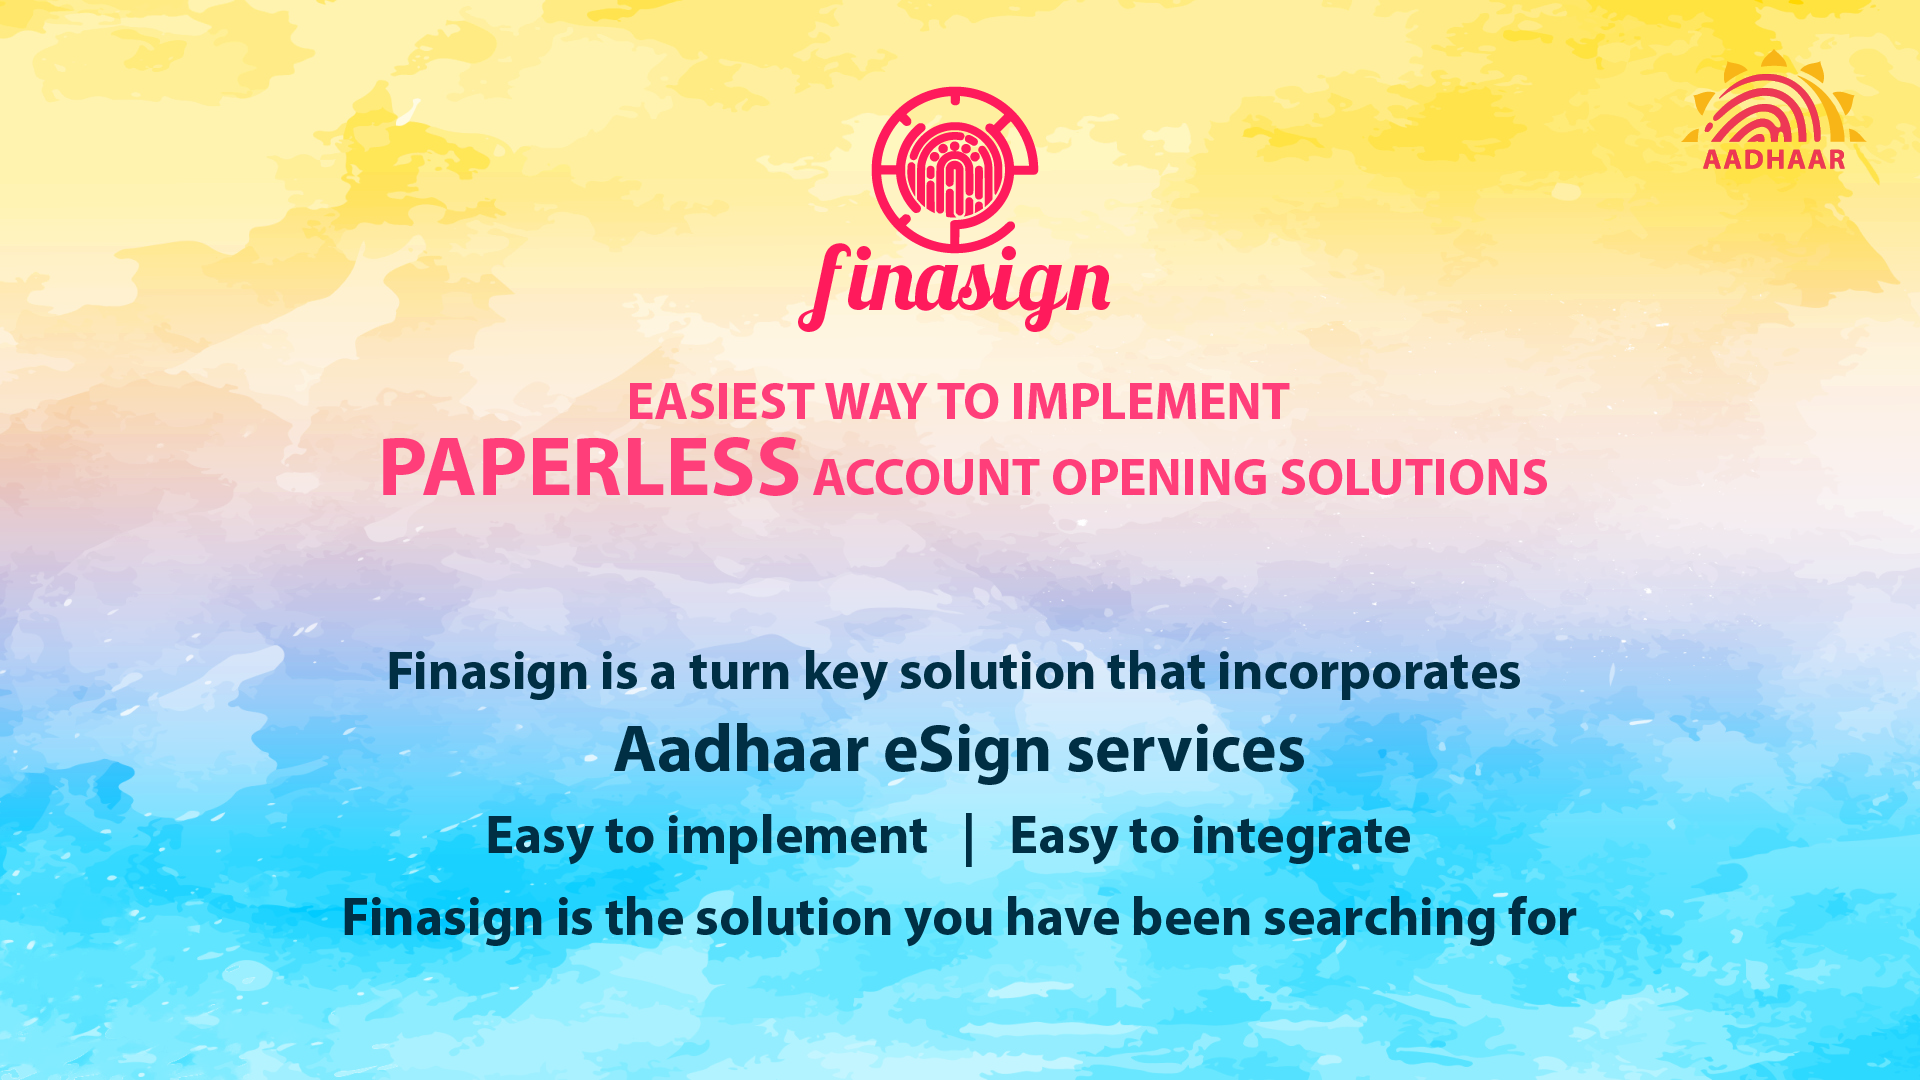 finasign. Easiest way to implement paperless account opening solution. Finasign is a turnkey solution that incorporates aadhaar esign services.Easy to implement easy to integrate. Finasign is the solution you have been searching for